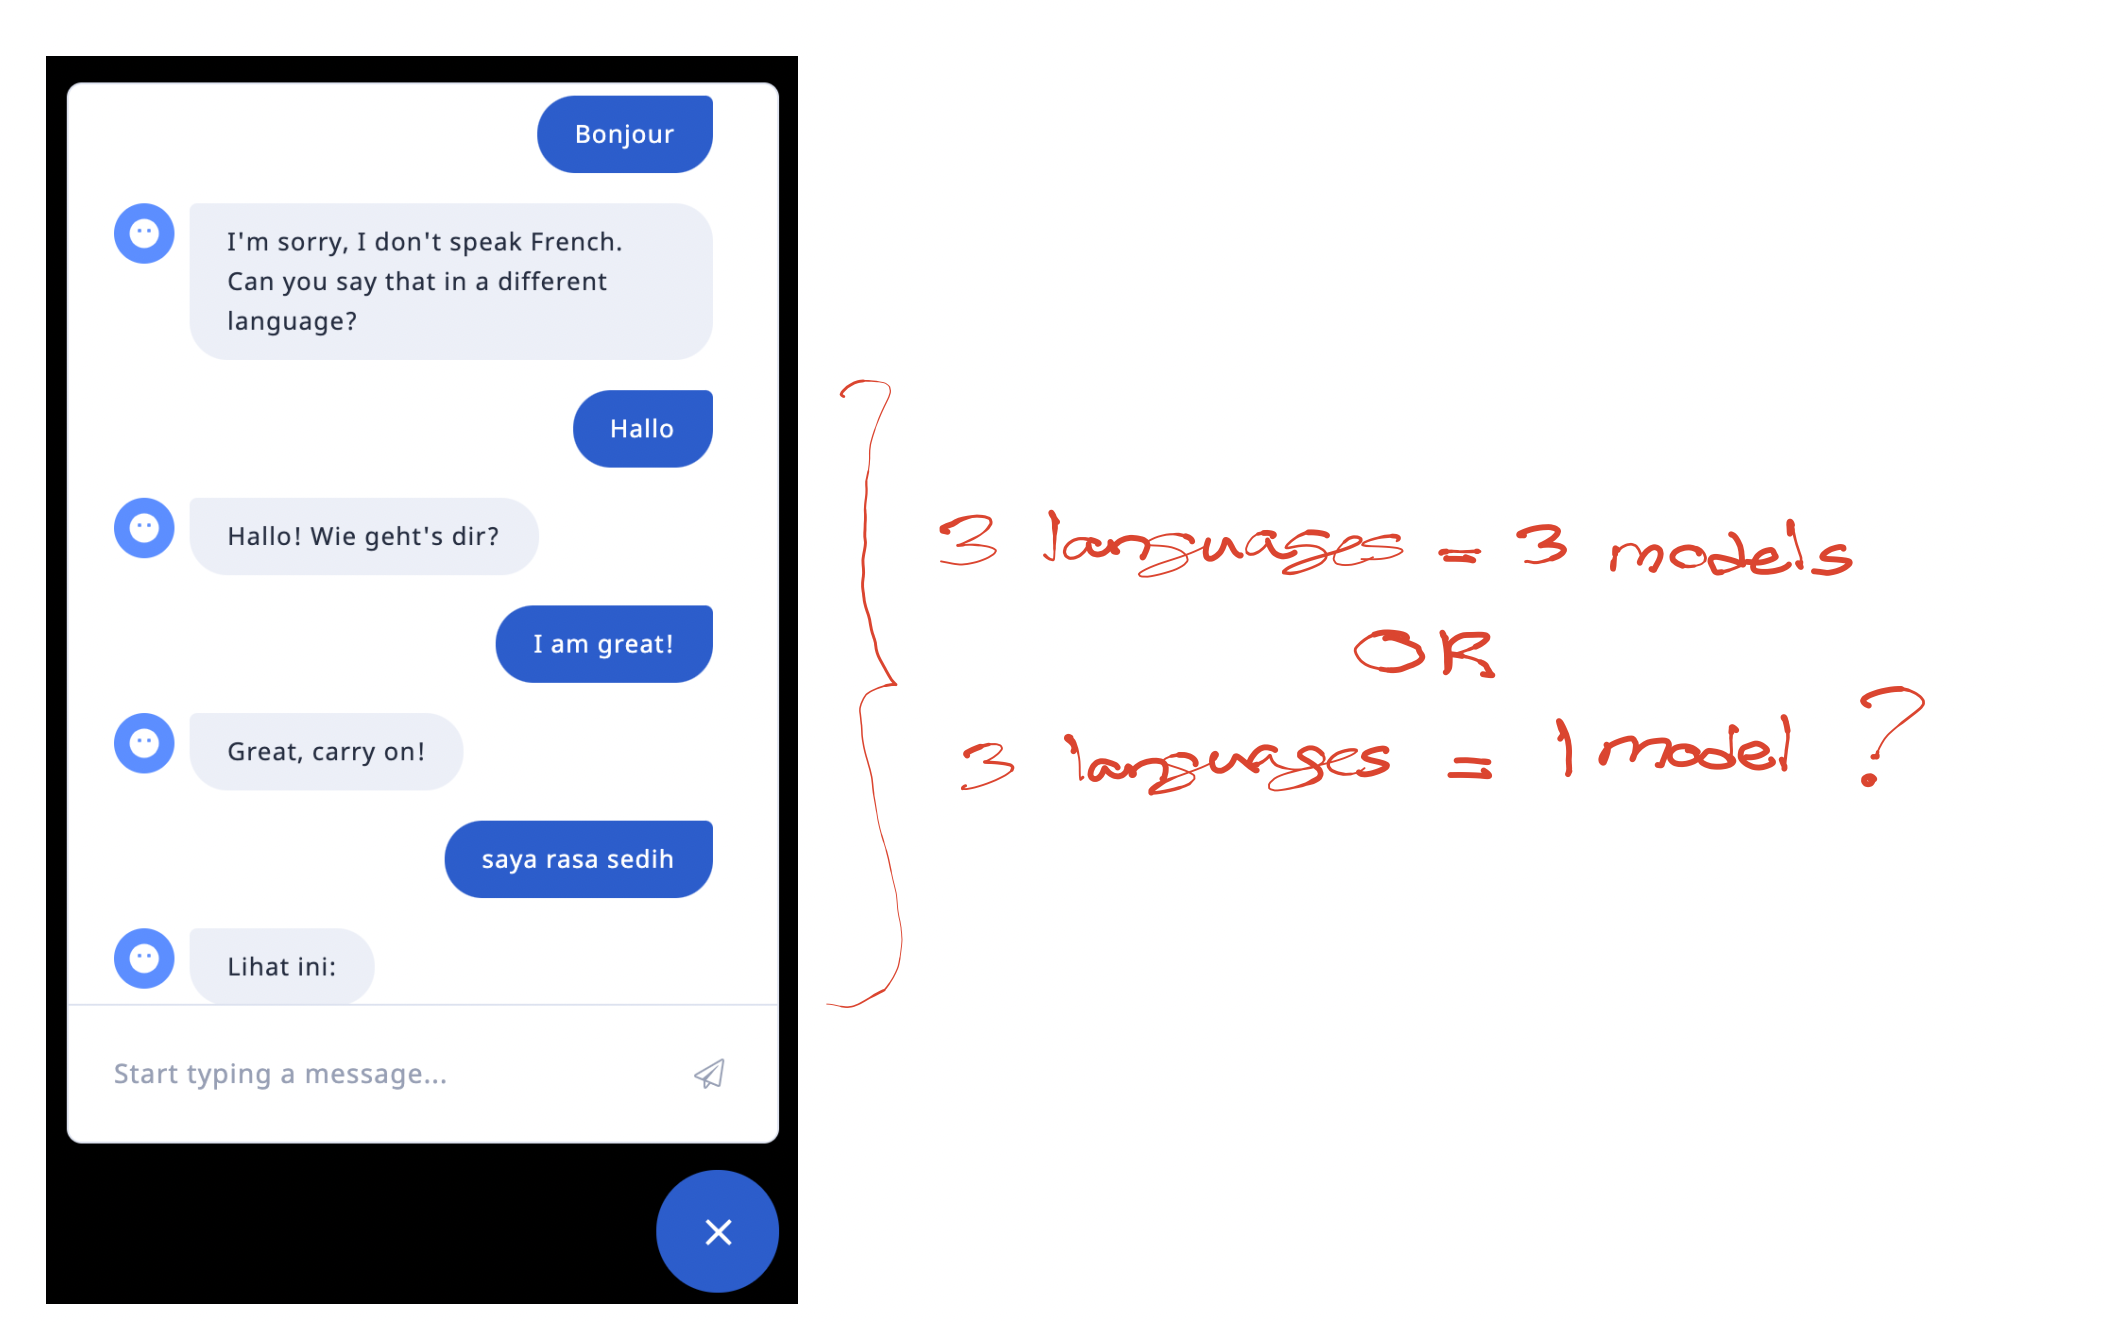 How To Build One Chatbot To Handle Multiple Languages